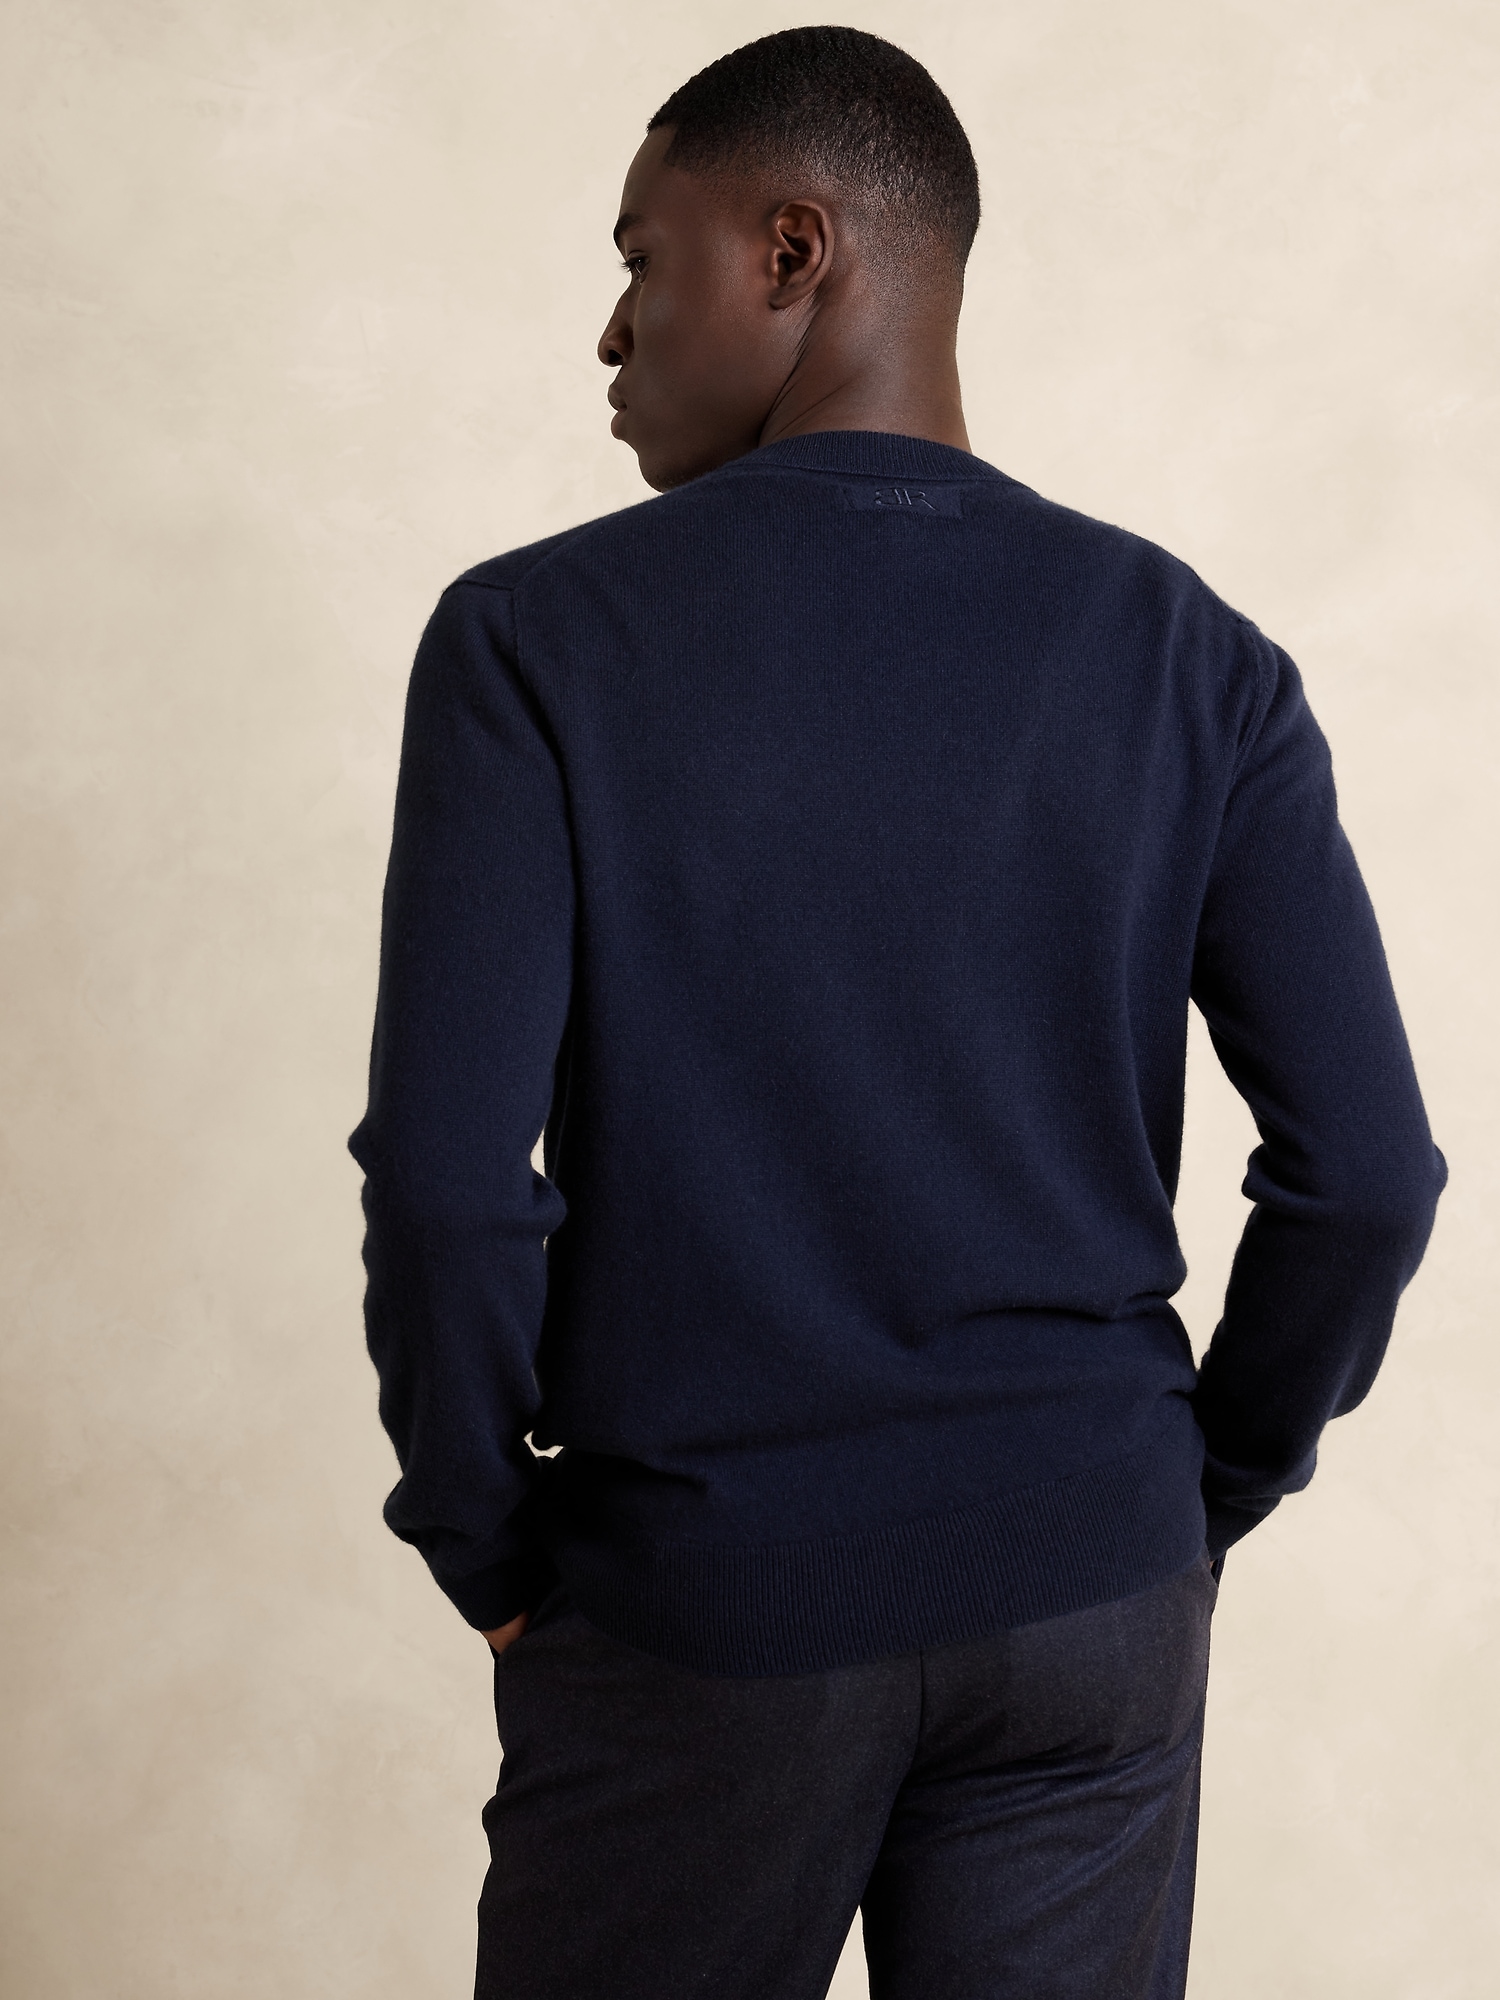 Tech Cashmere Crew Neck Sweater Charcoal Heather